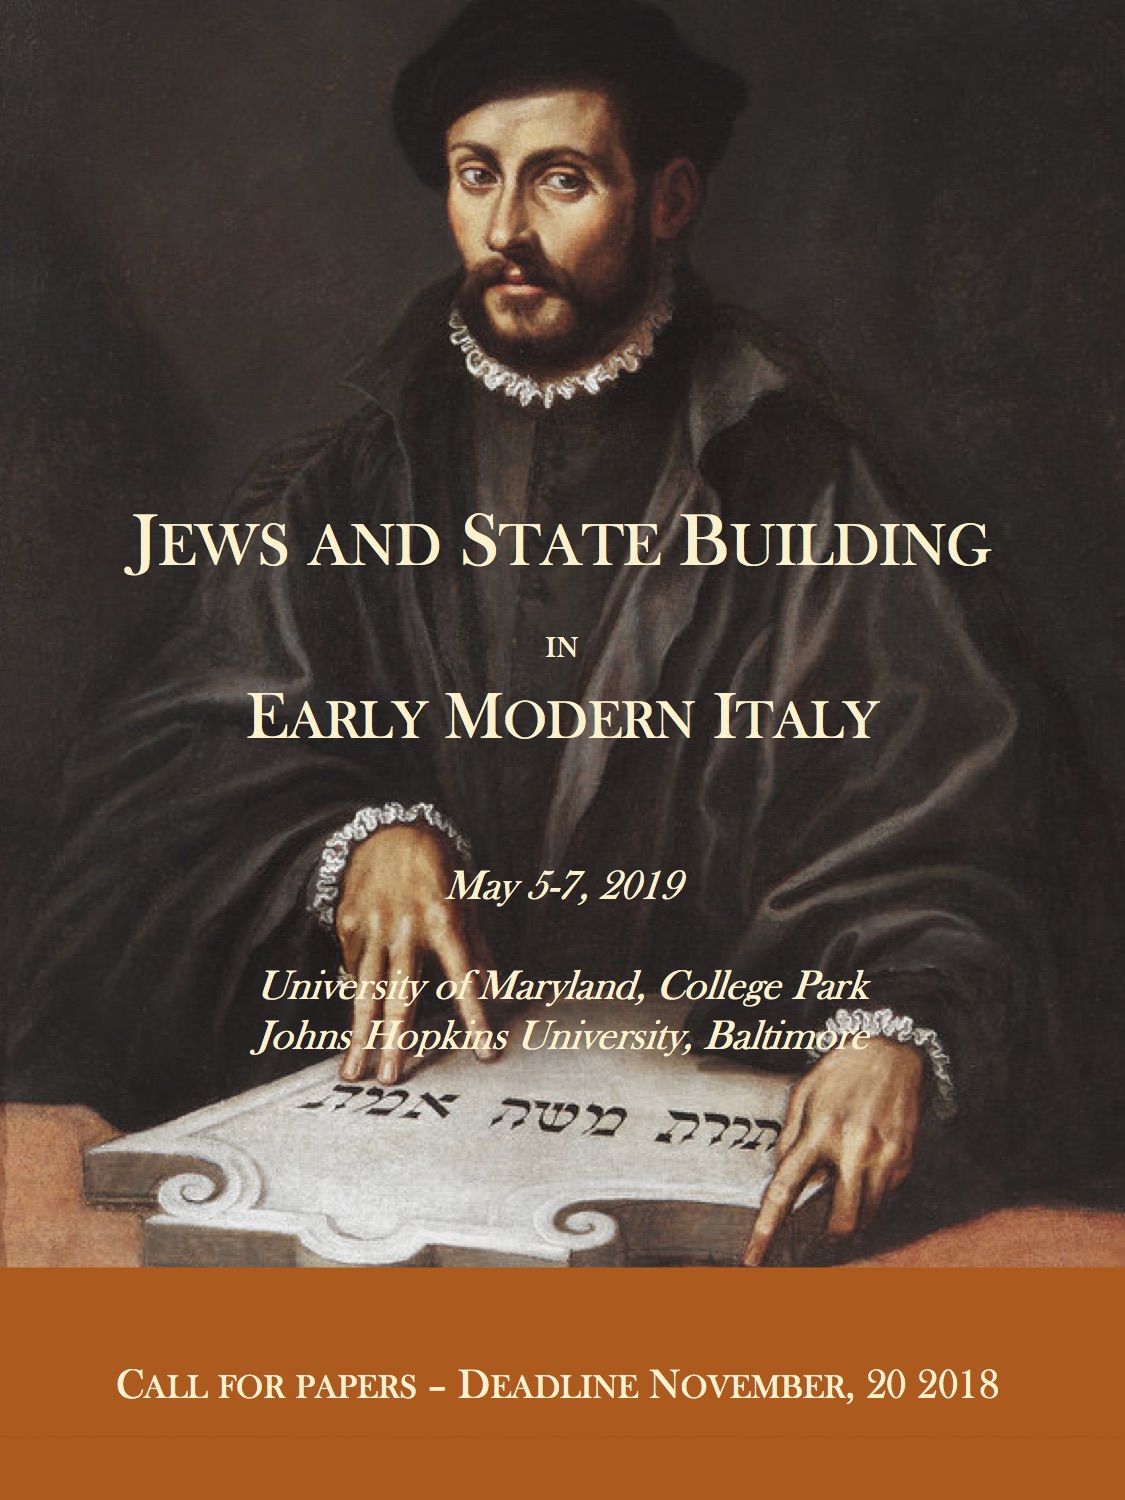 Call For Papers: Jews And State Building In Early Modern Italy